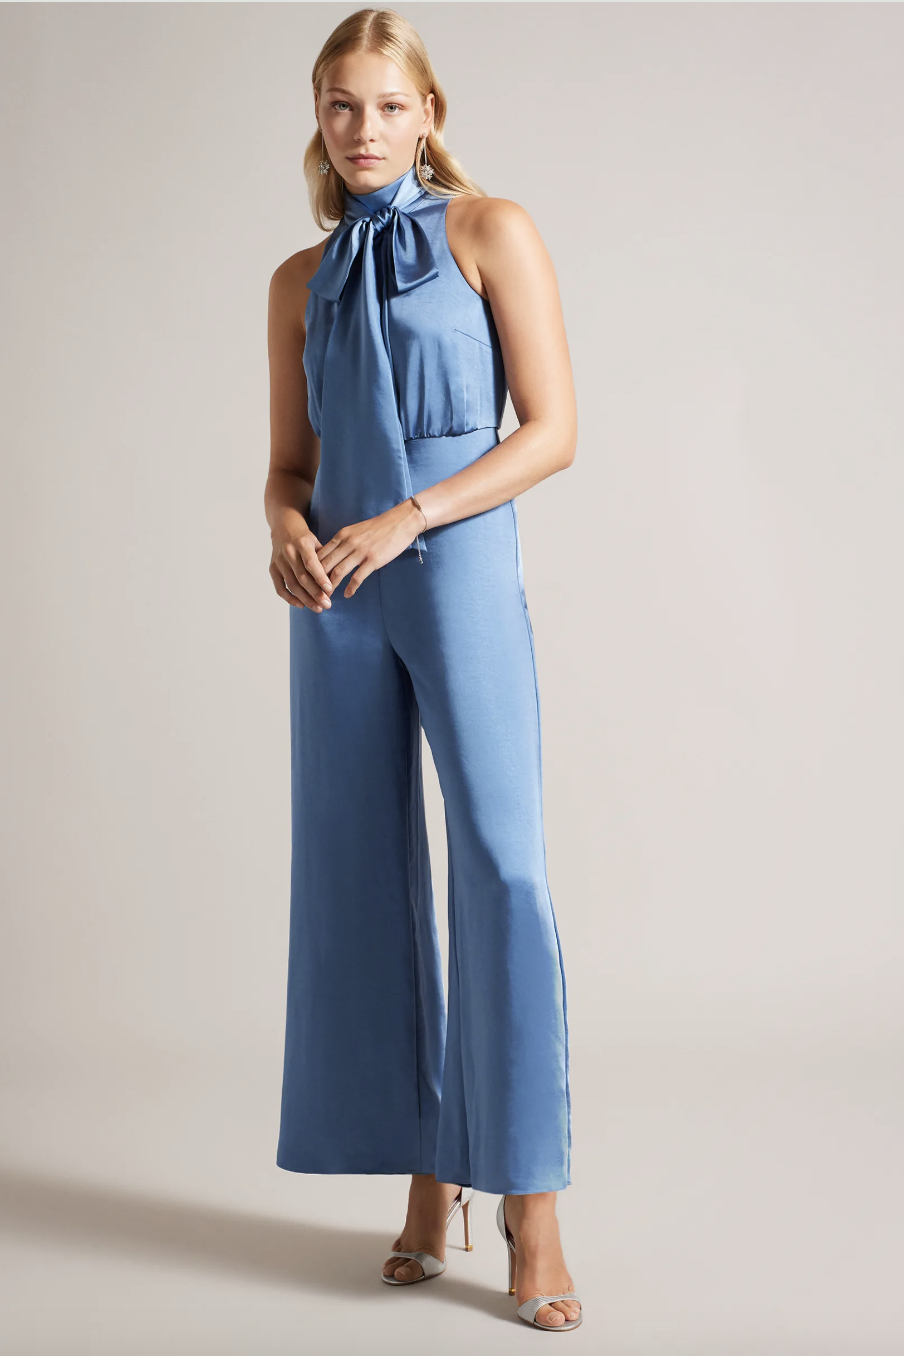 Jumpsuits for weddings: 31 best bridal and wedding jumpsuits